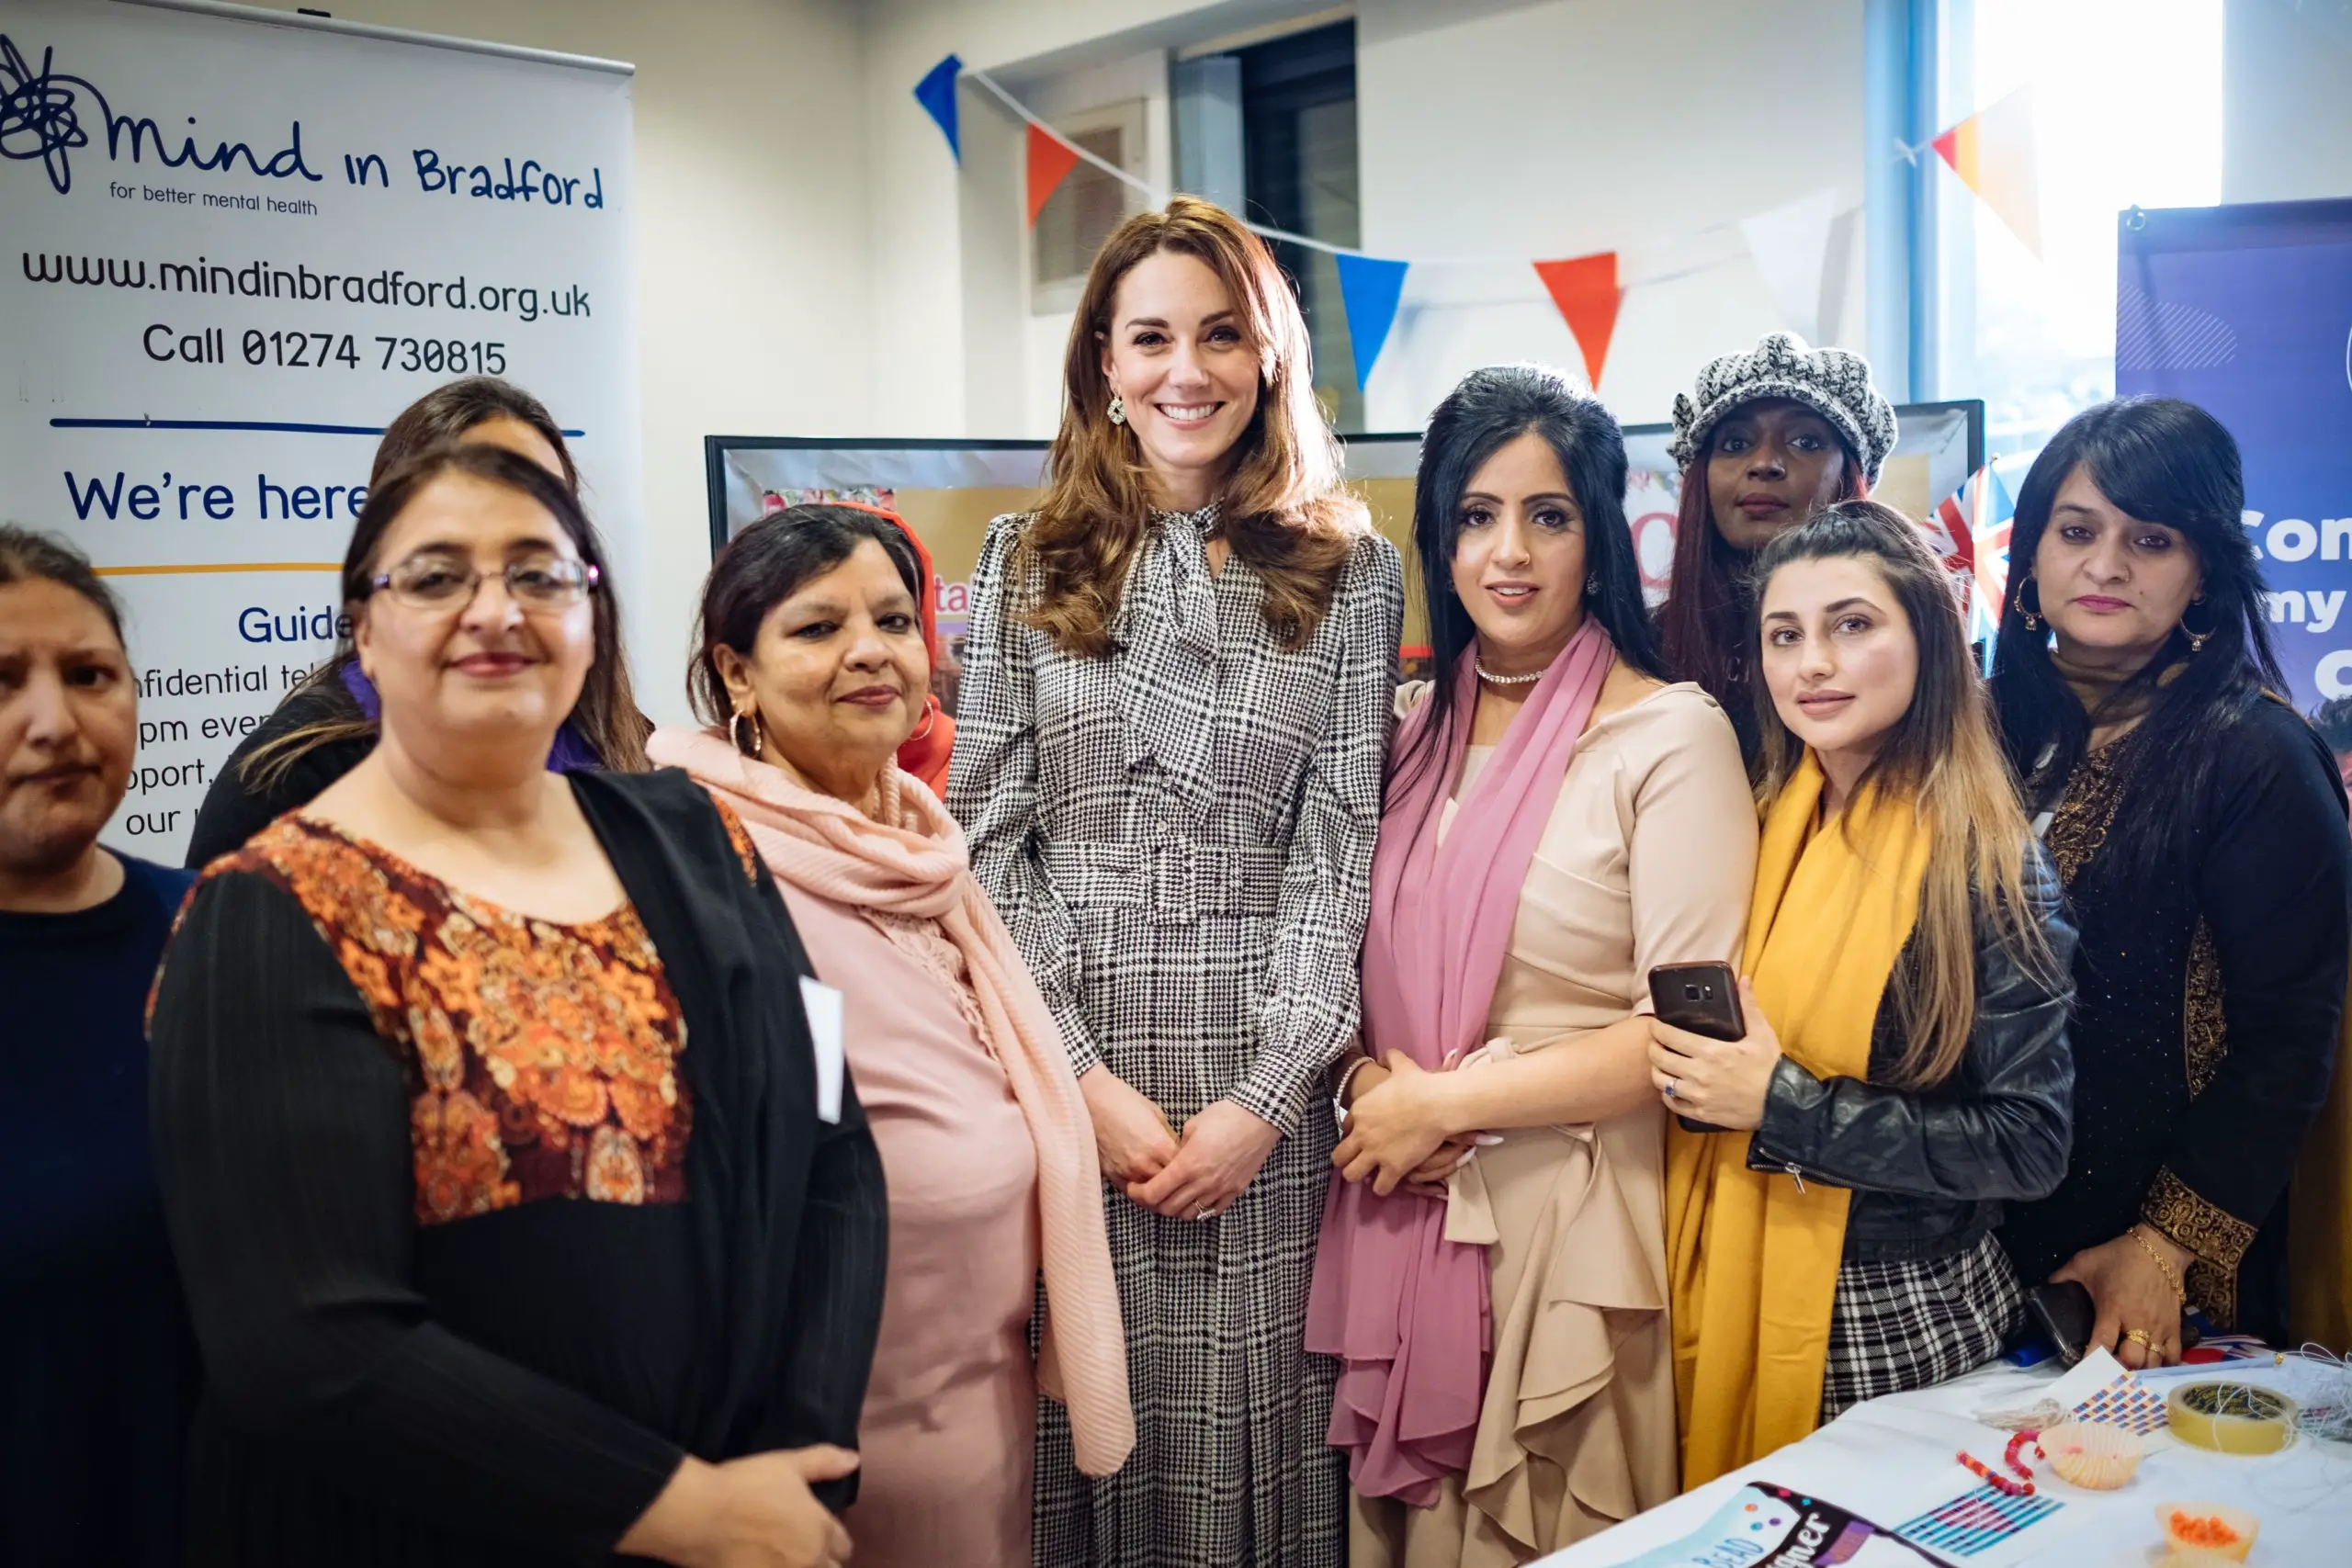 The Duke and Duchess of Cambridge visited Bradford in January 2020